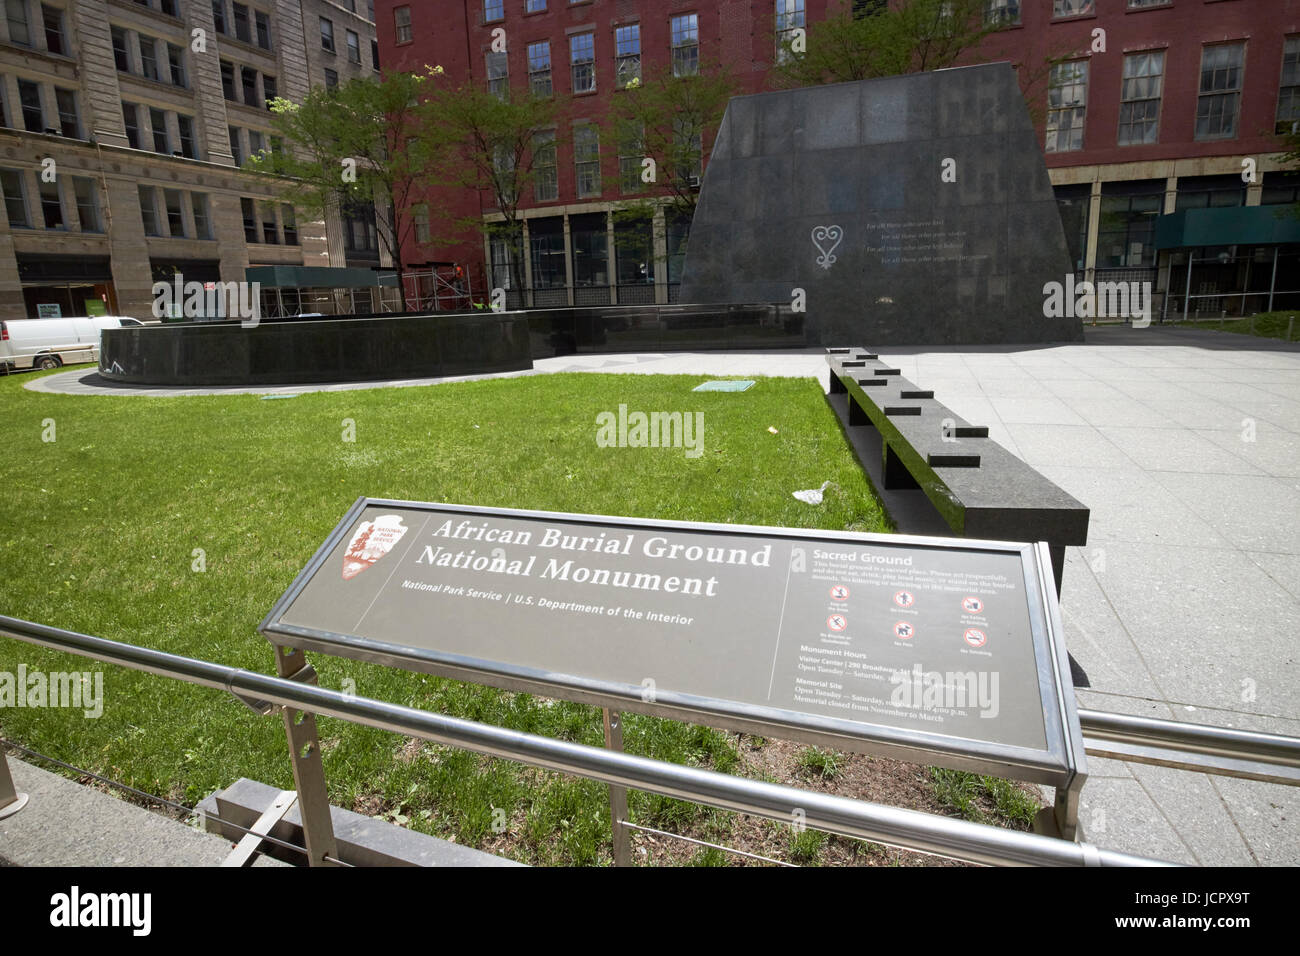 african burial ground national monument civic center New York City USA Stock Photo